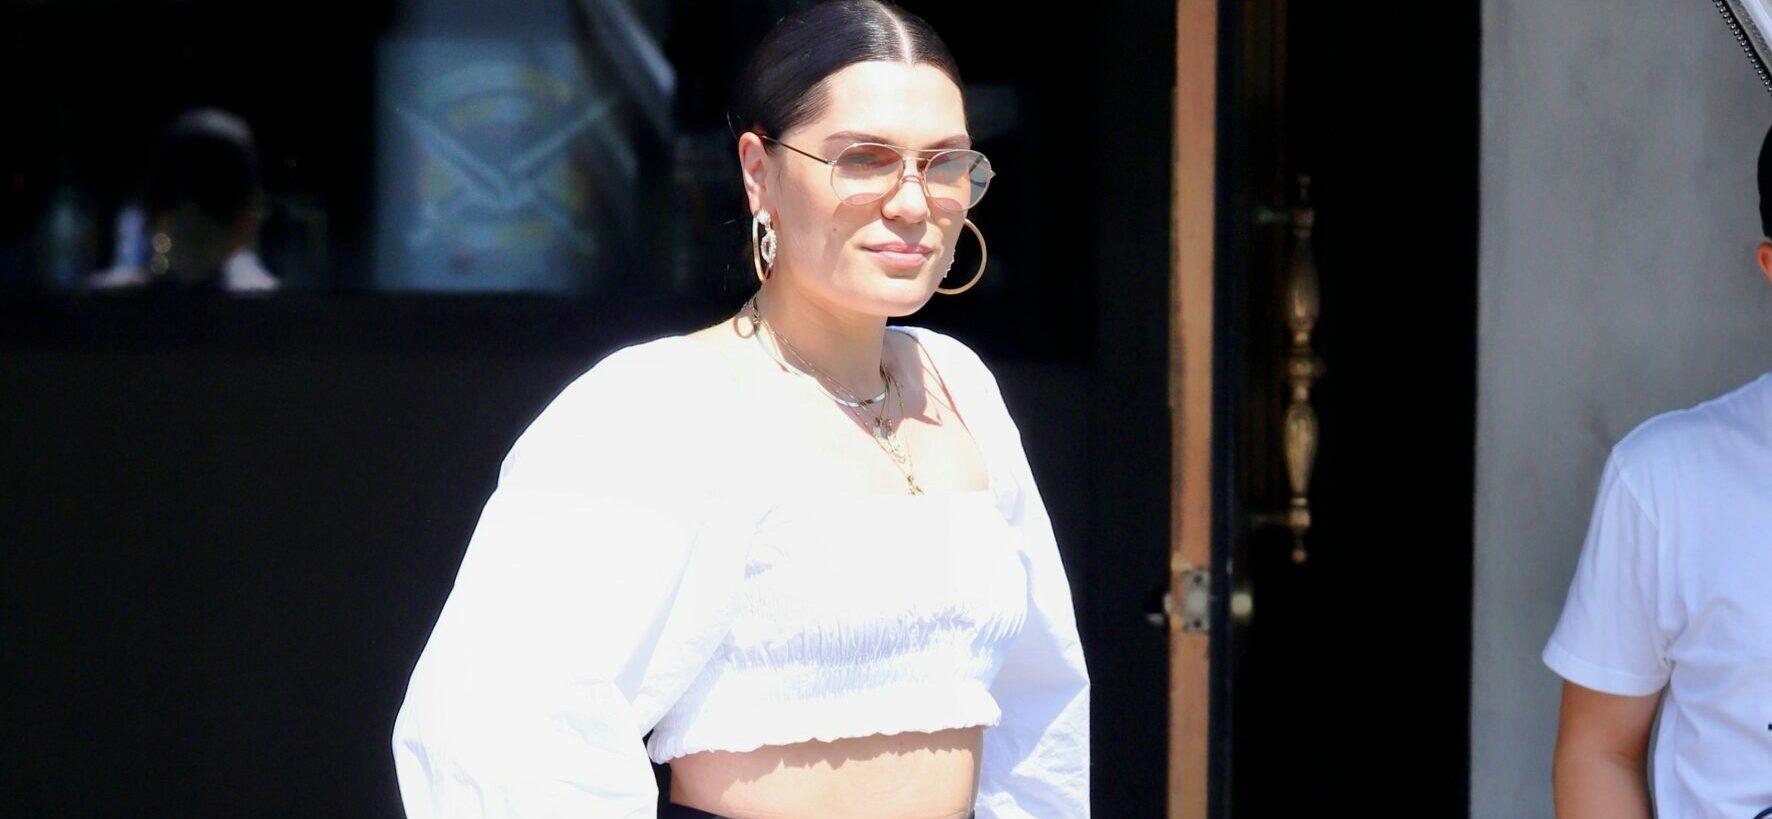 Jessie J seen lunching with her make up artist friend at Crossroads